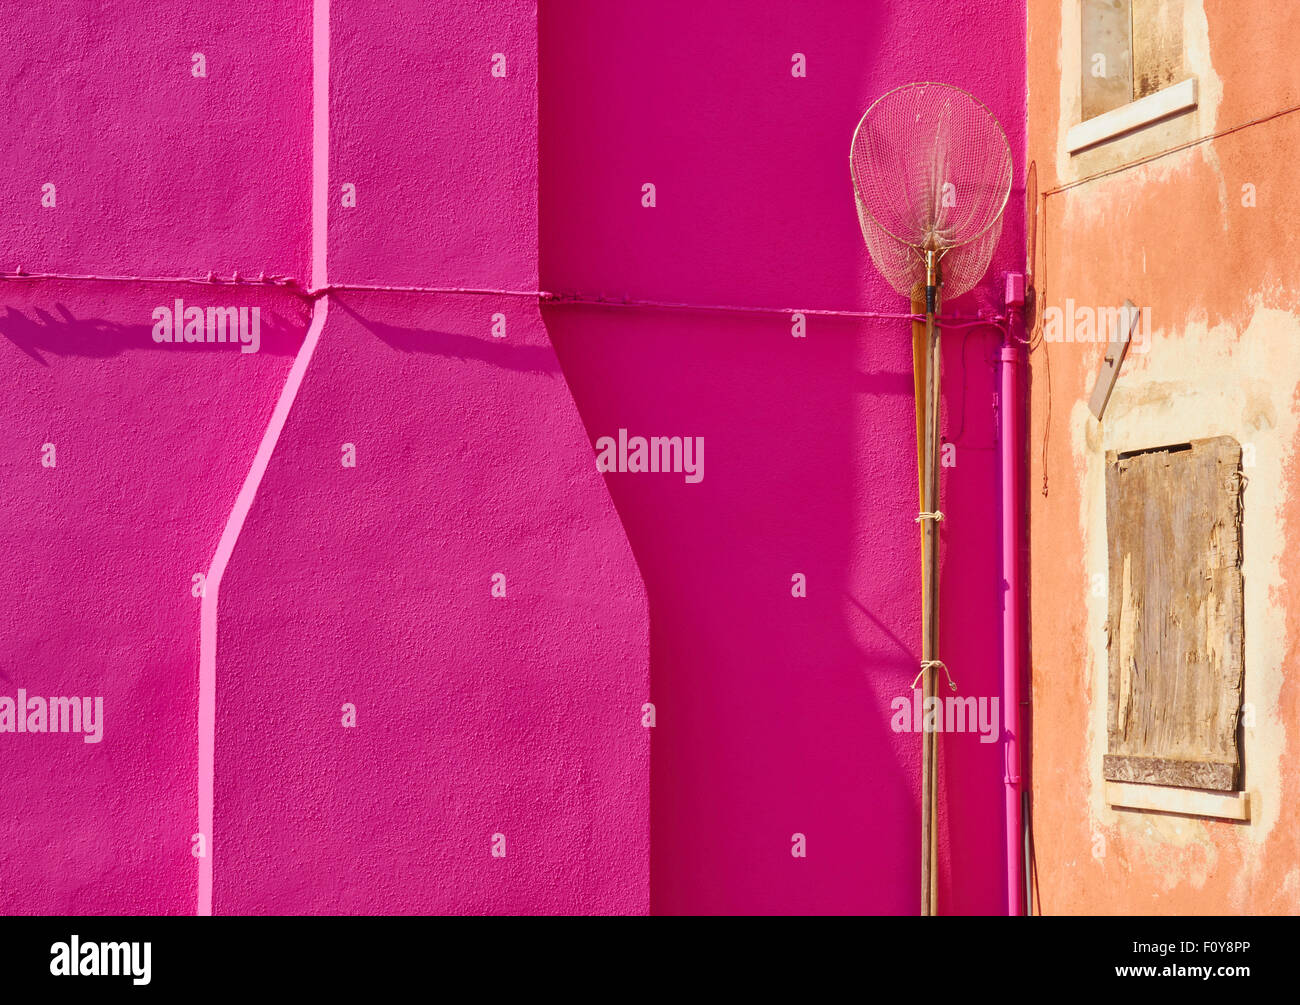 https://c8.alamy.com/comp/F0Y8PP/fishing-net-against-bright-pink-wall-next-to-boarded-up-house-burano-F0Y8PP.jpg